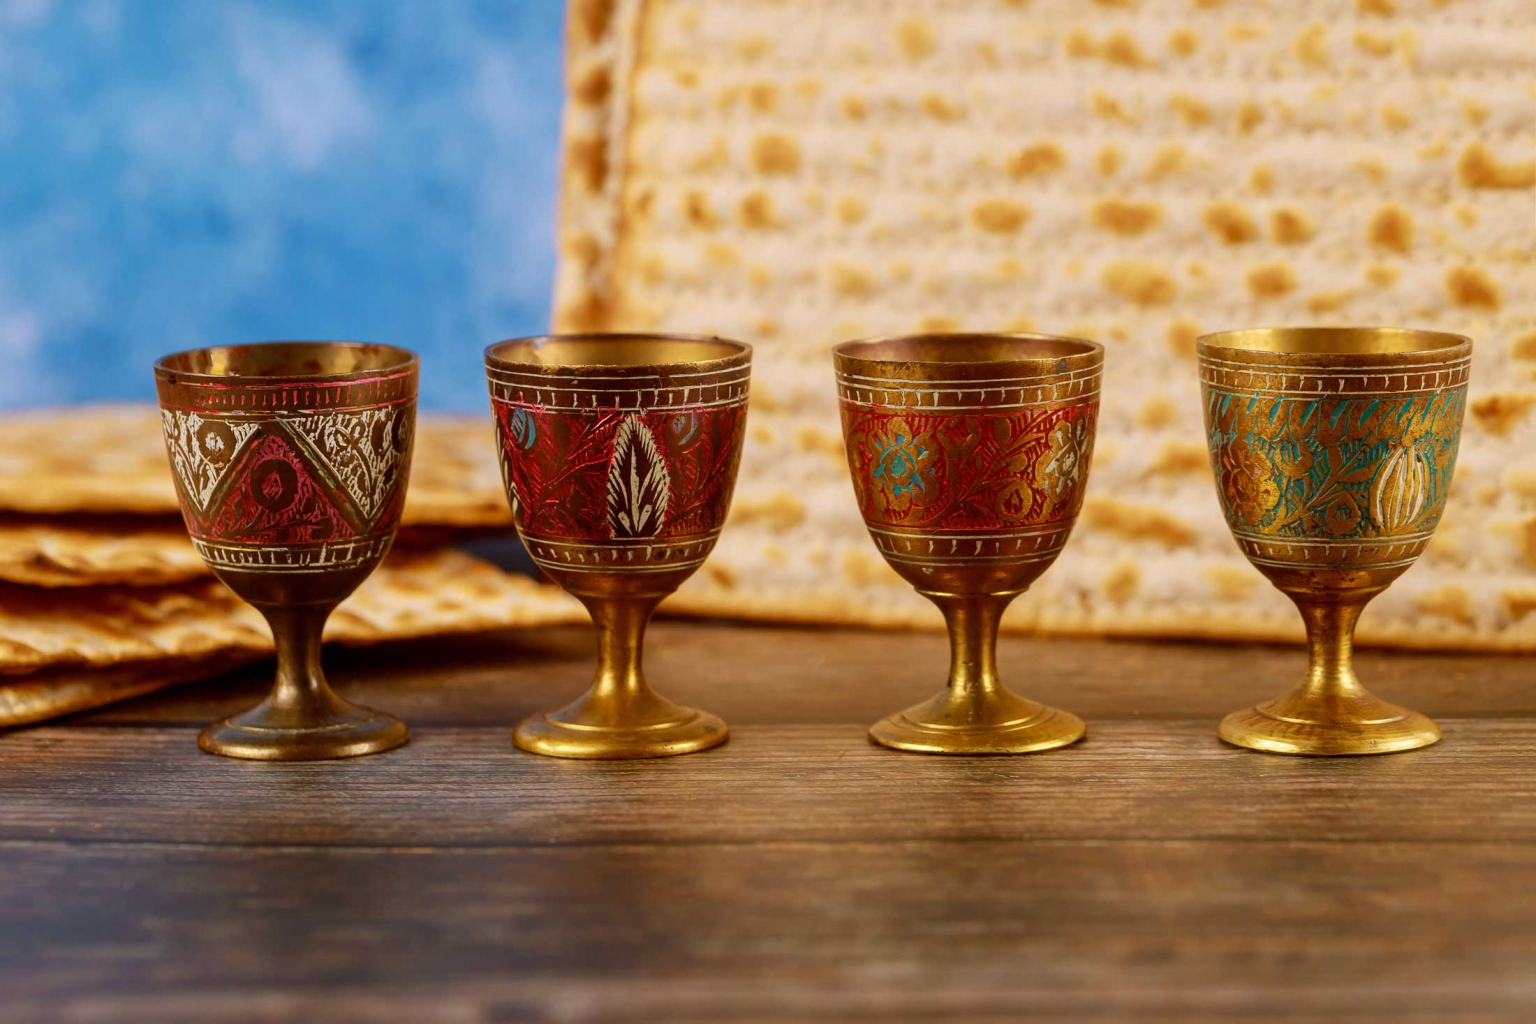 Jesus the Messiah in the Four Cups of Passover